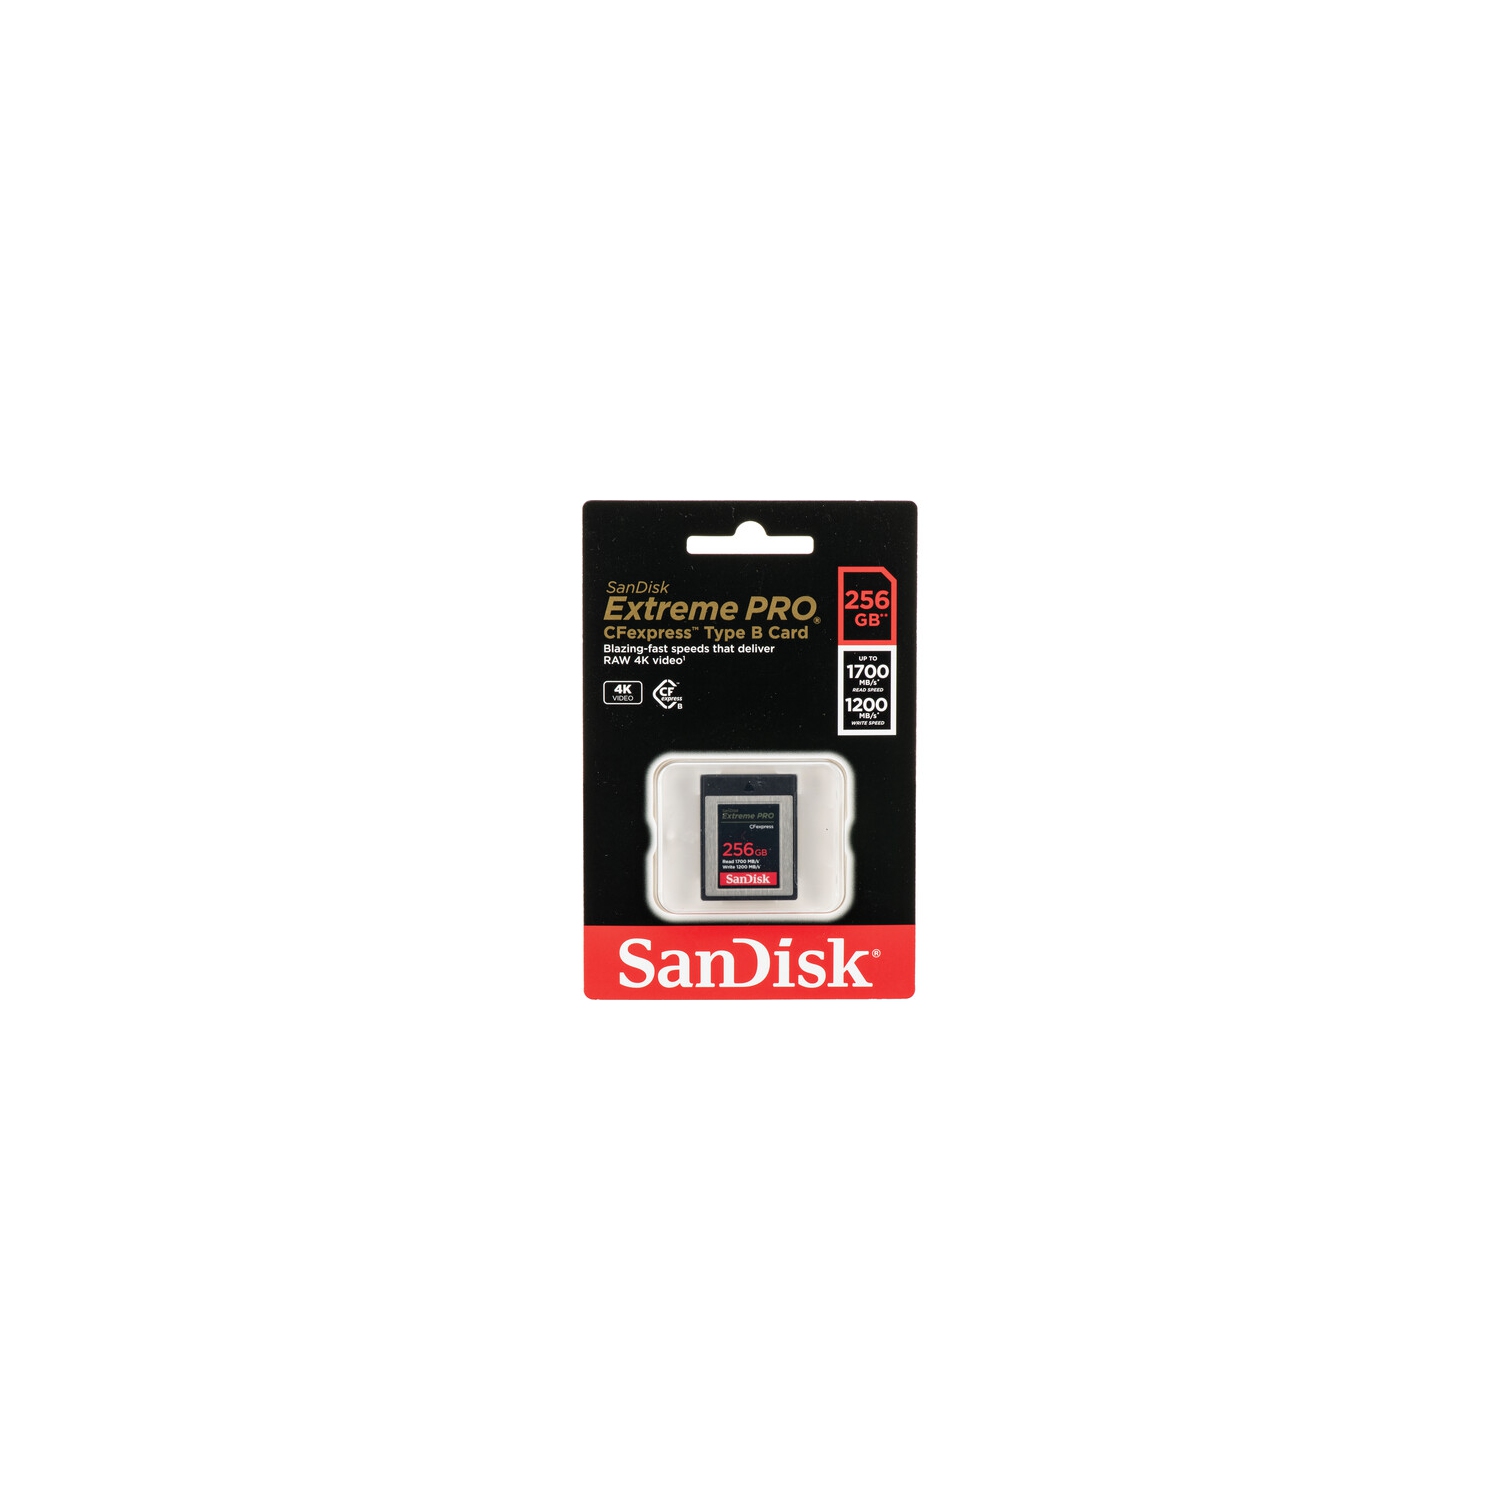 SanDisk Extreme PRO CFexpress Card Type B (256GB, SDCFE-256G-GN4NN) - Brand New